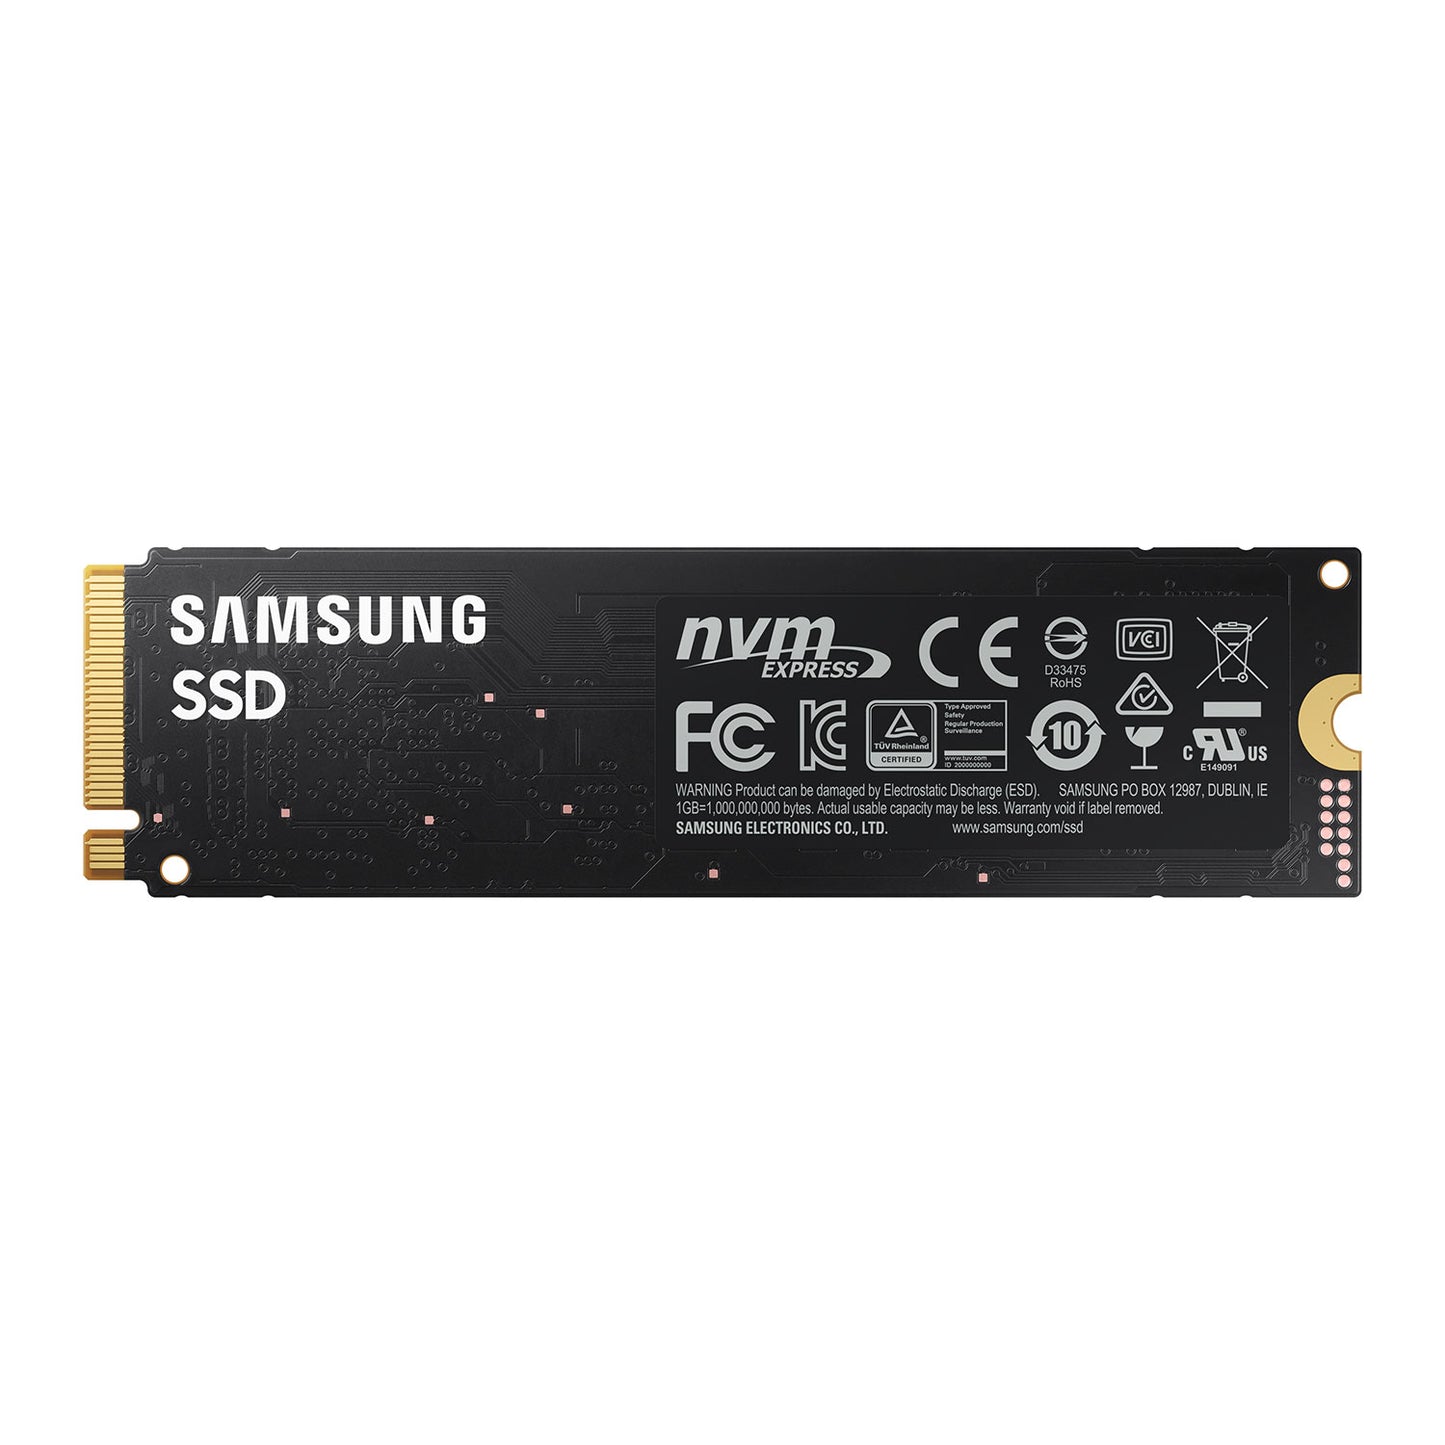 Samsung 980 1TB NVMe M.2 Internal SSD/Solid State Drive 3500MB/s Read, 3000MB/s Write